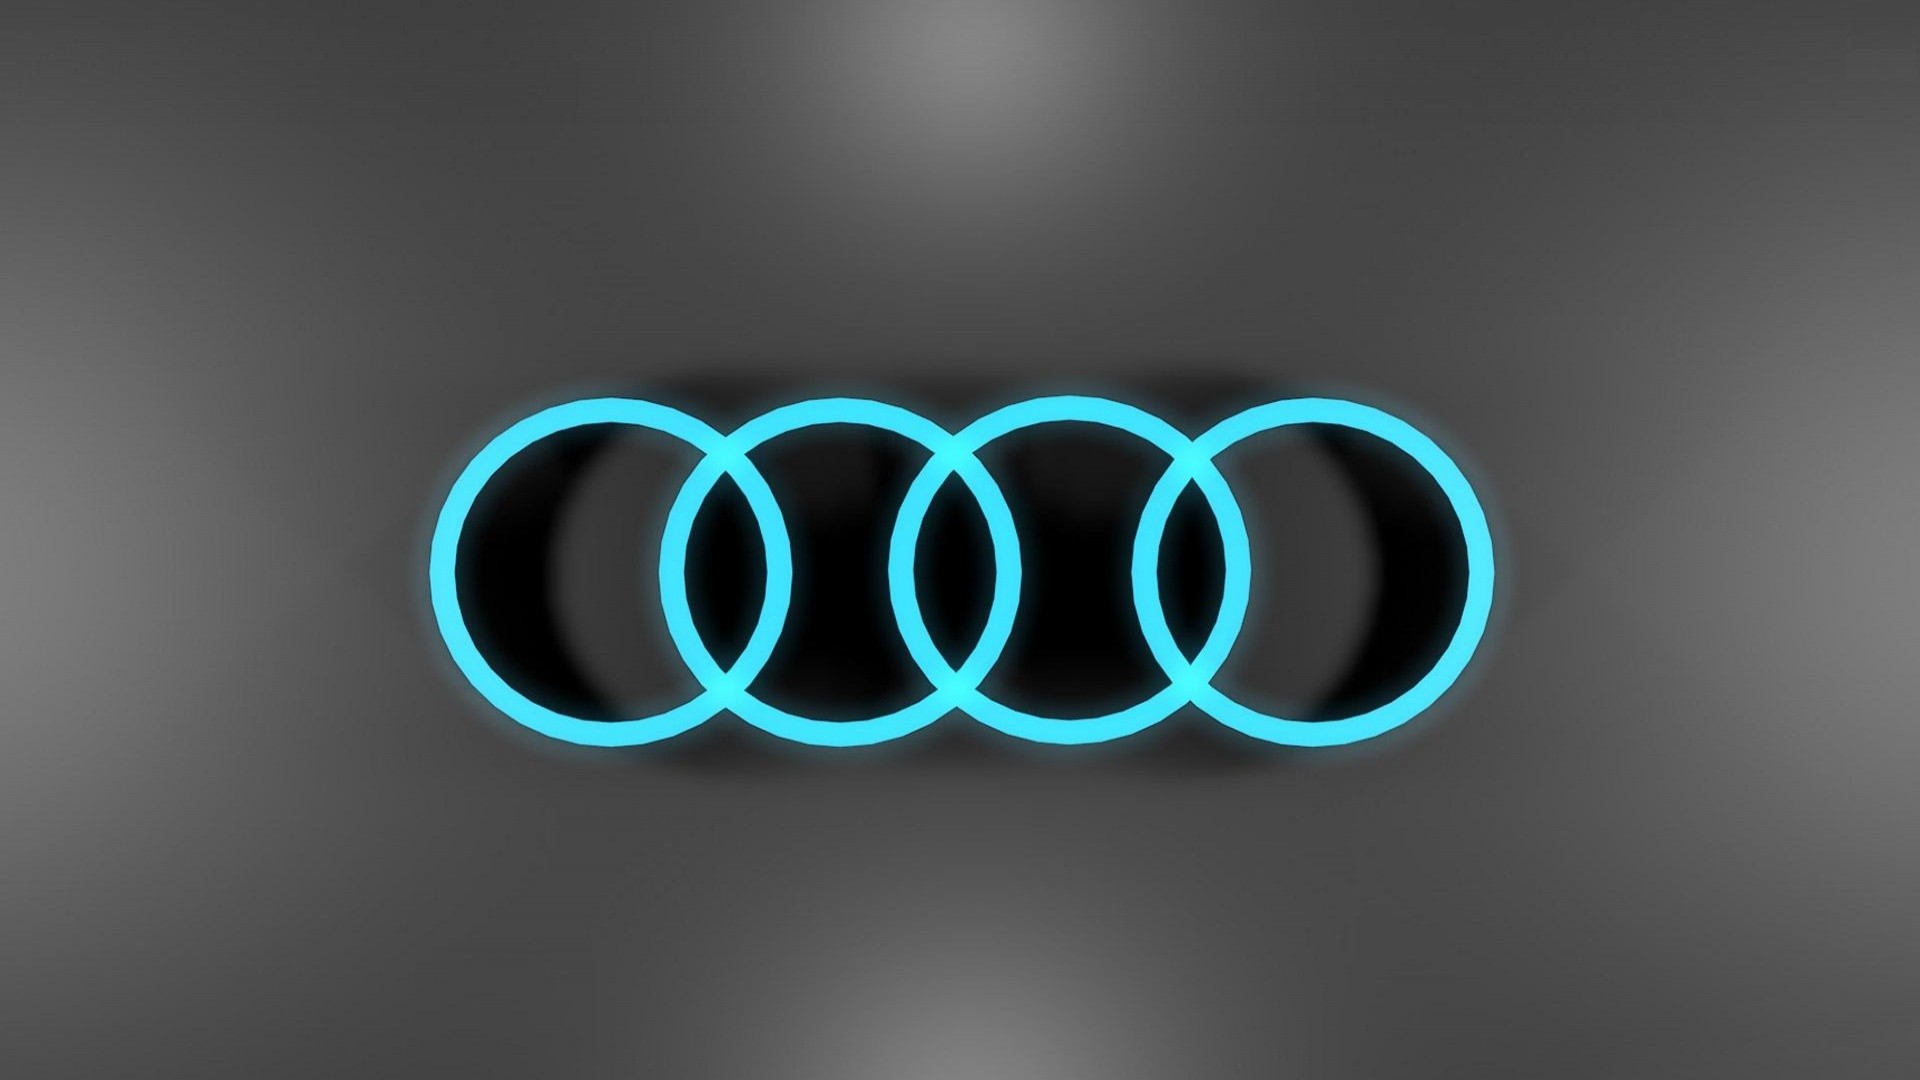 1920x1080 3D Pictures Audi Logo Cool Hd Wallpapers Audi Cool Logo Cool Hd Wallpapers